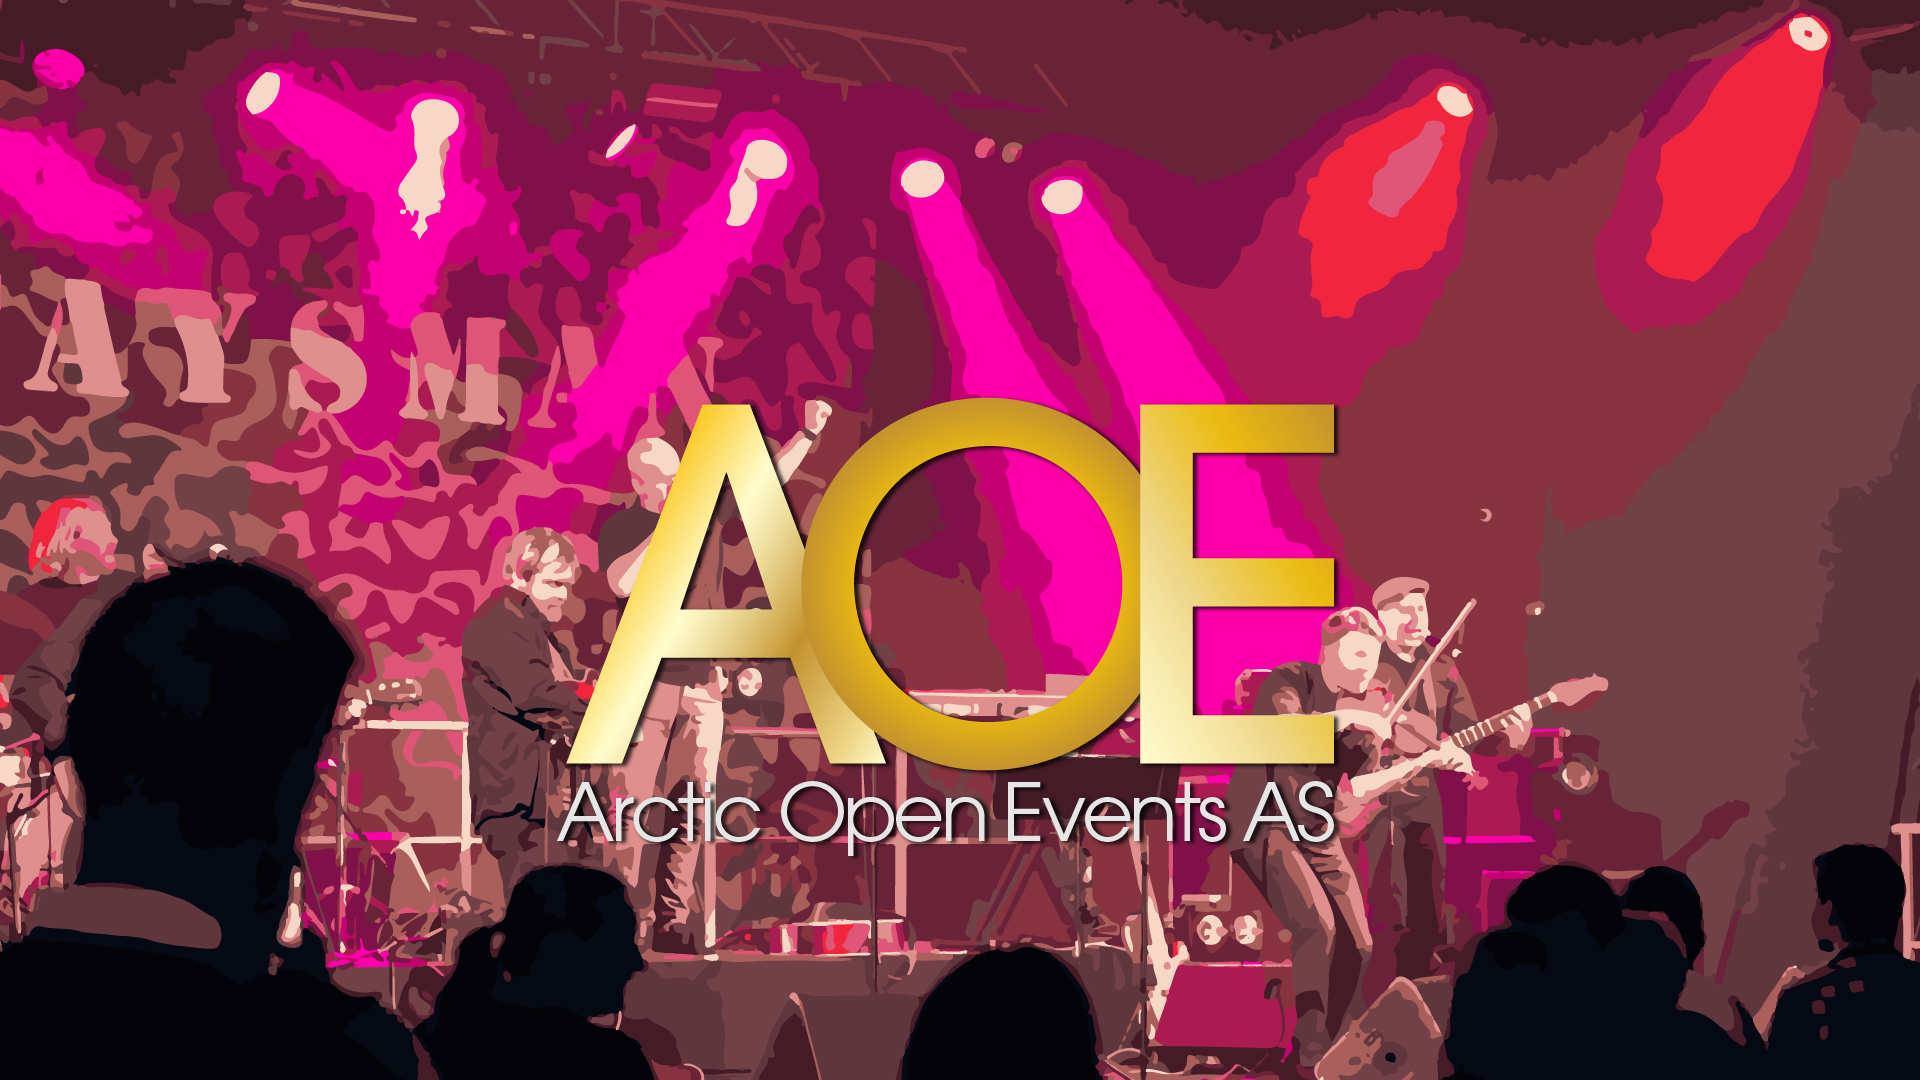 Arctic Open Events AS